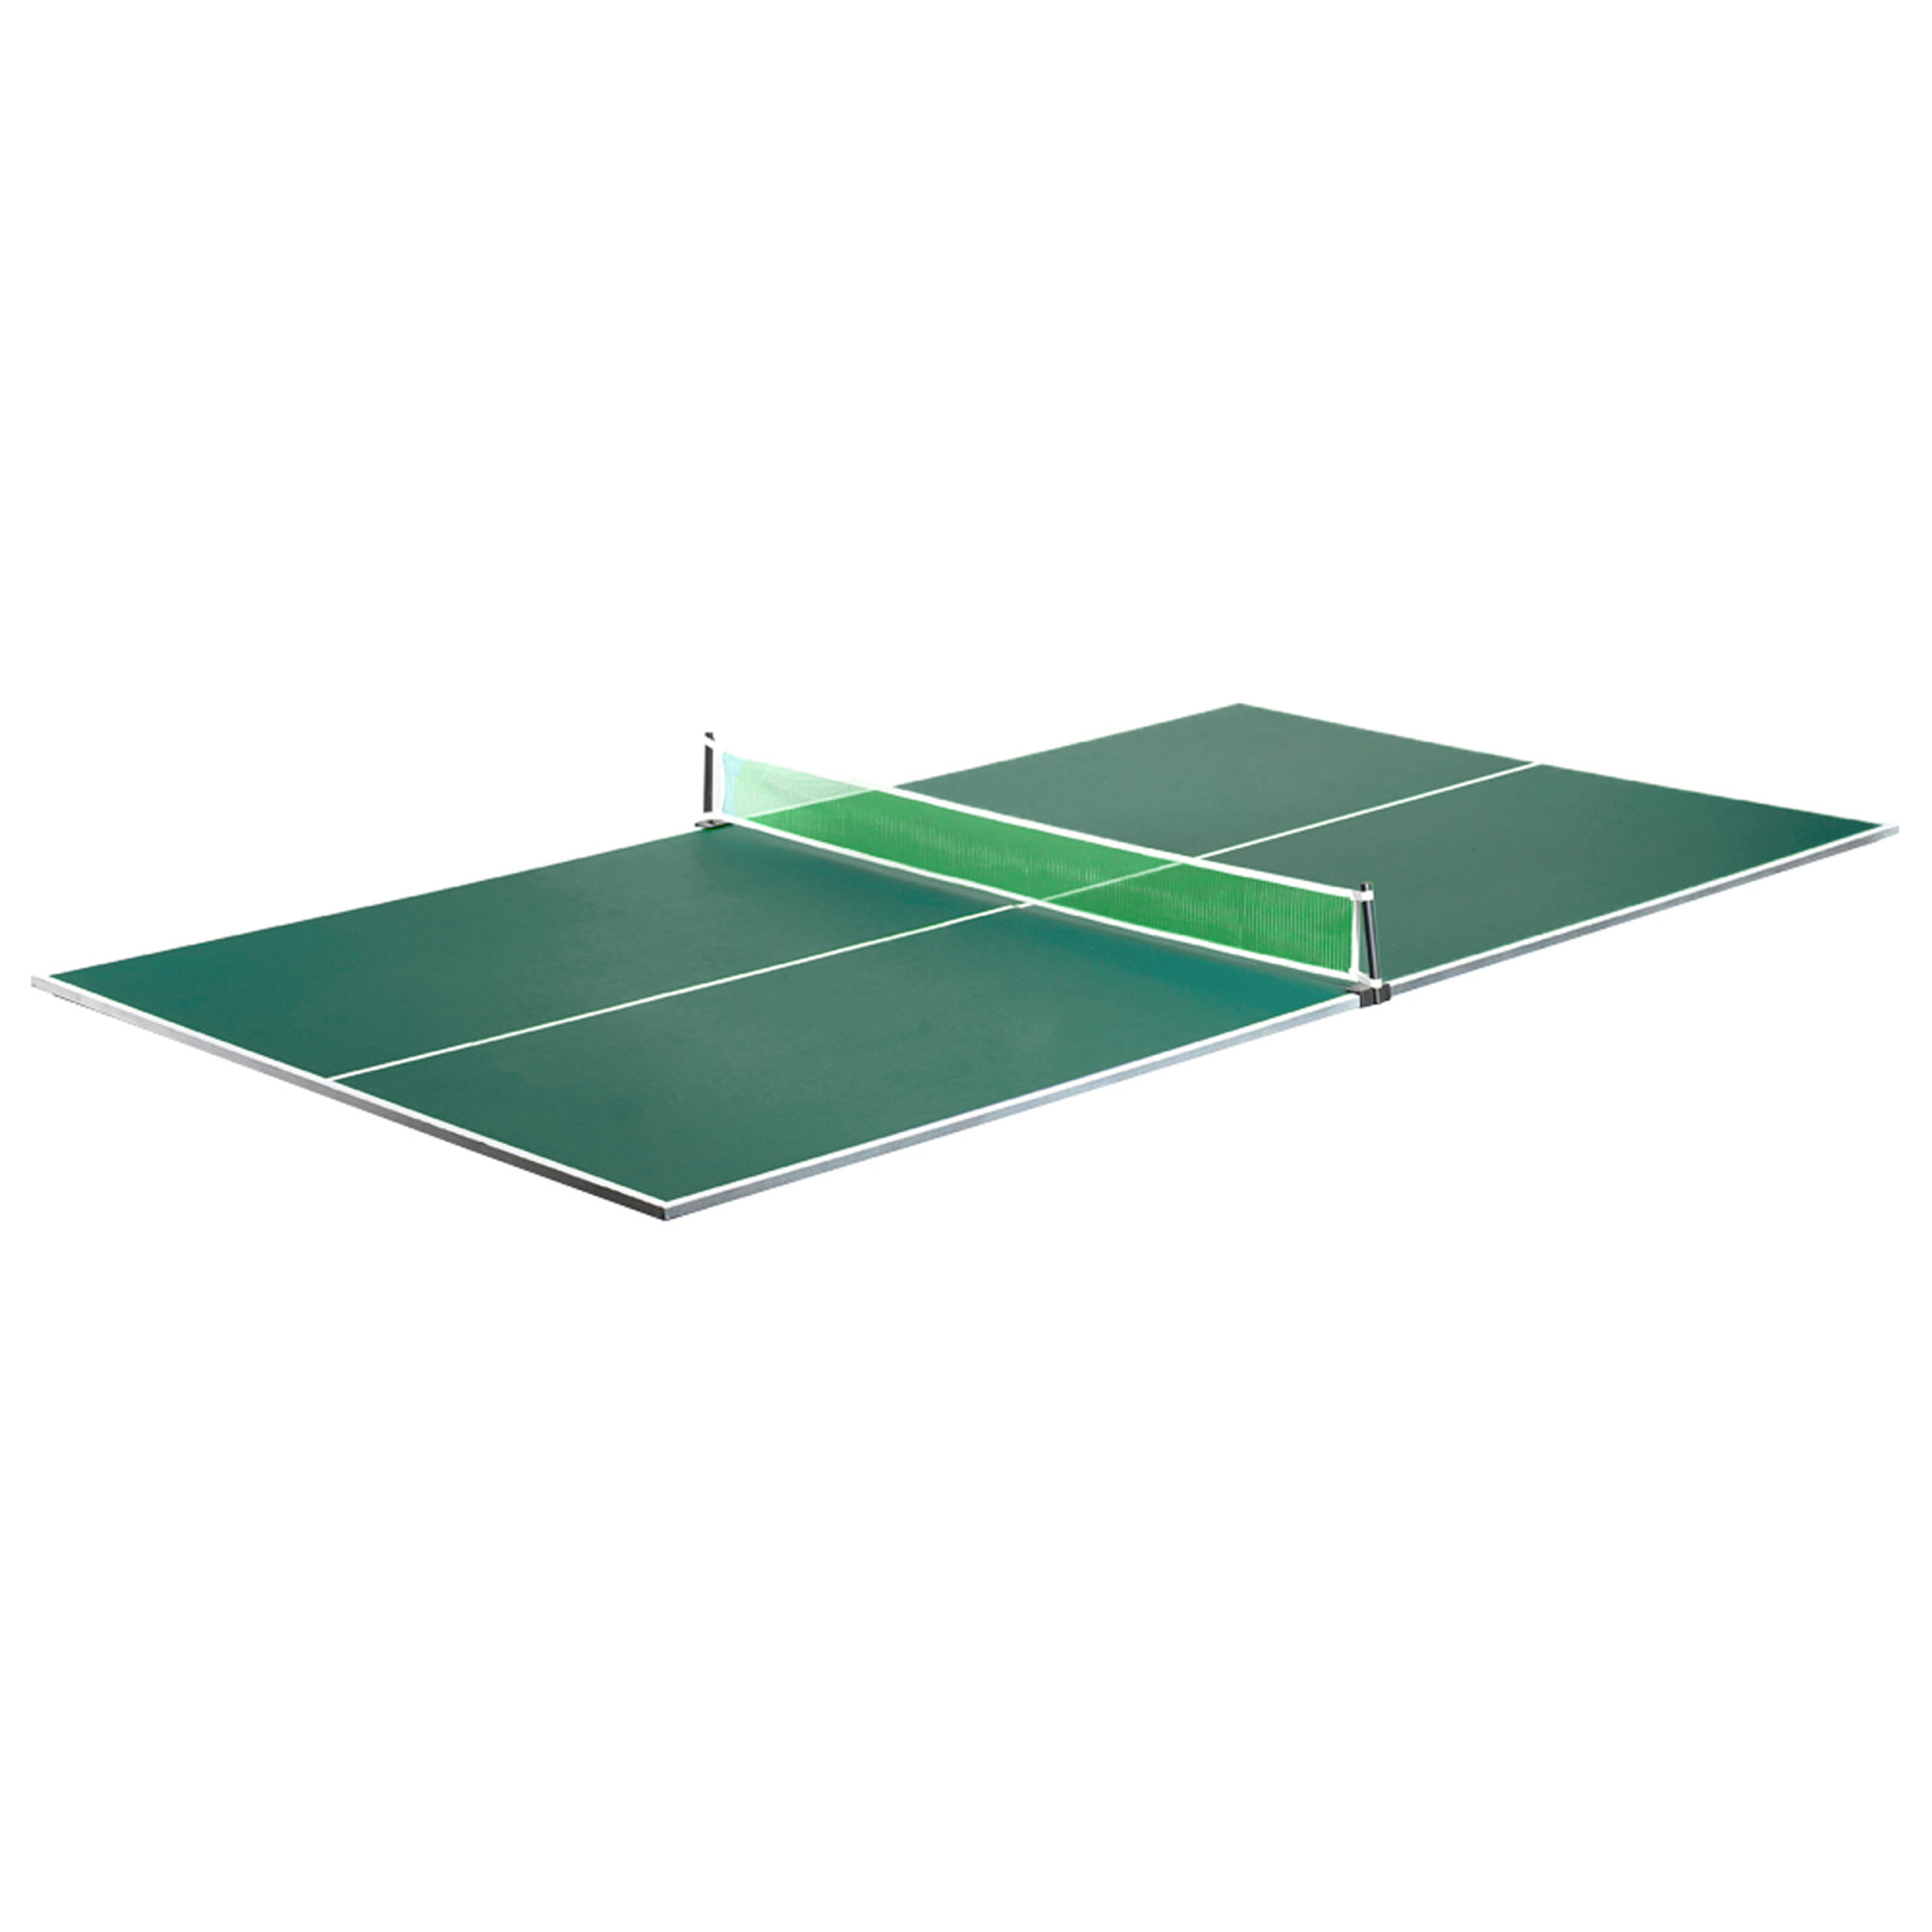 Hathaway Reflex 6-ft Portable Table Tennis Table, 60-in wide - Blue - image 1 of 3